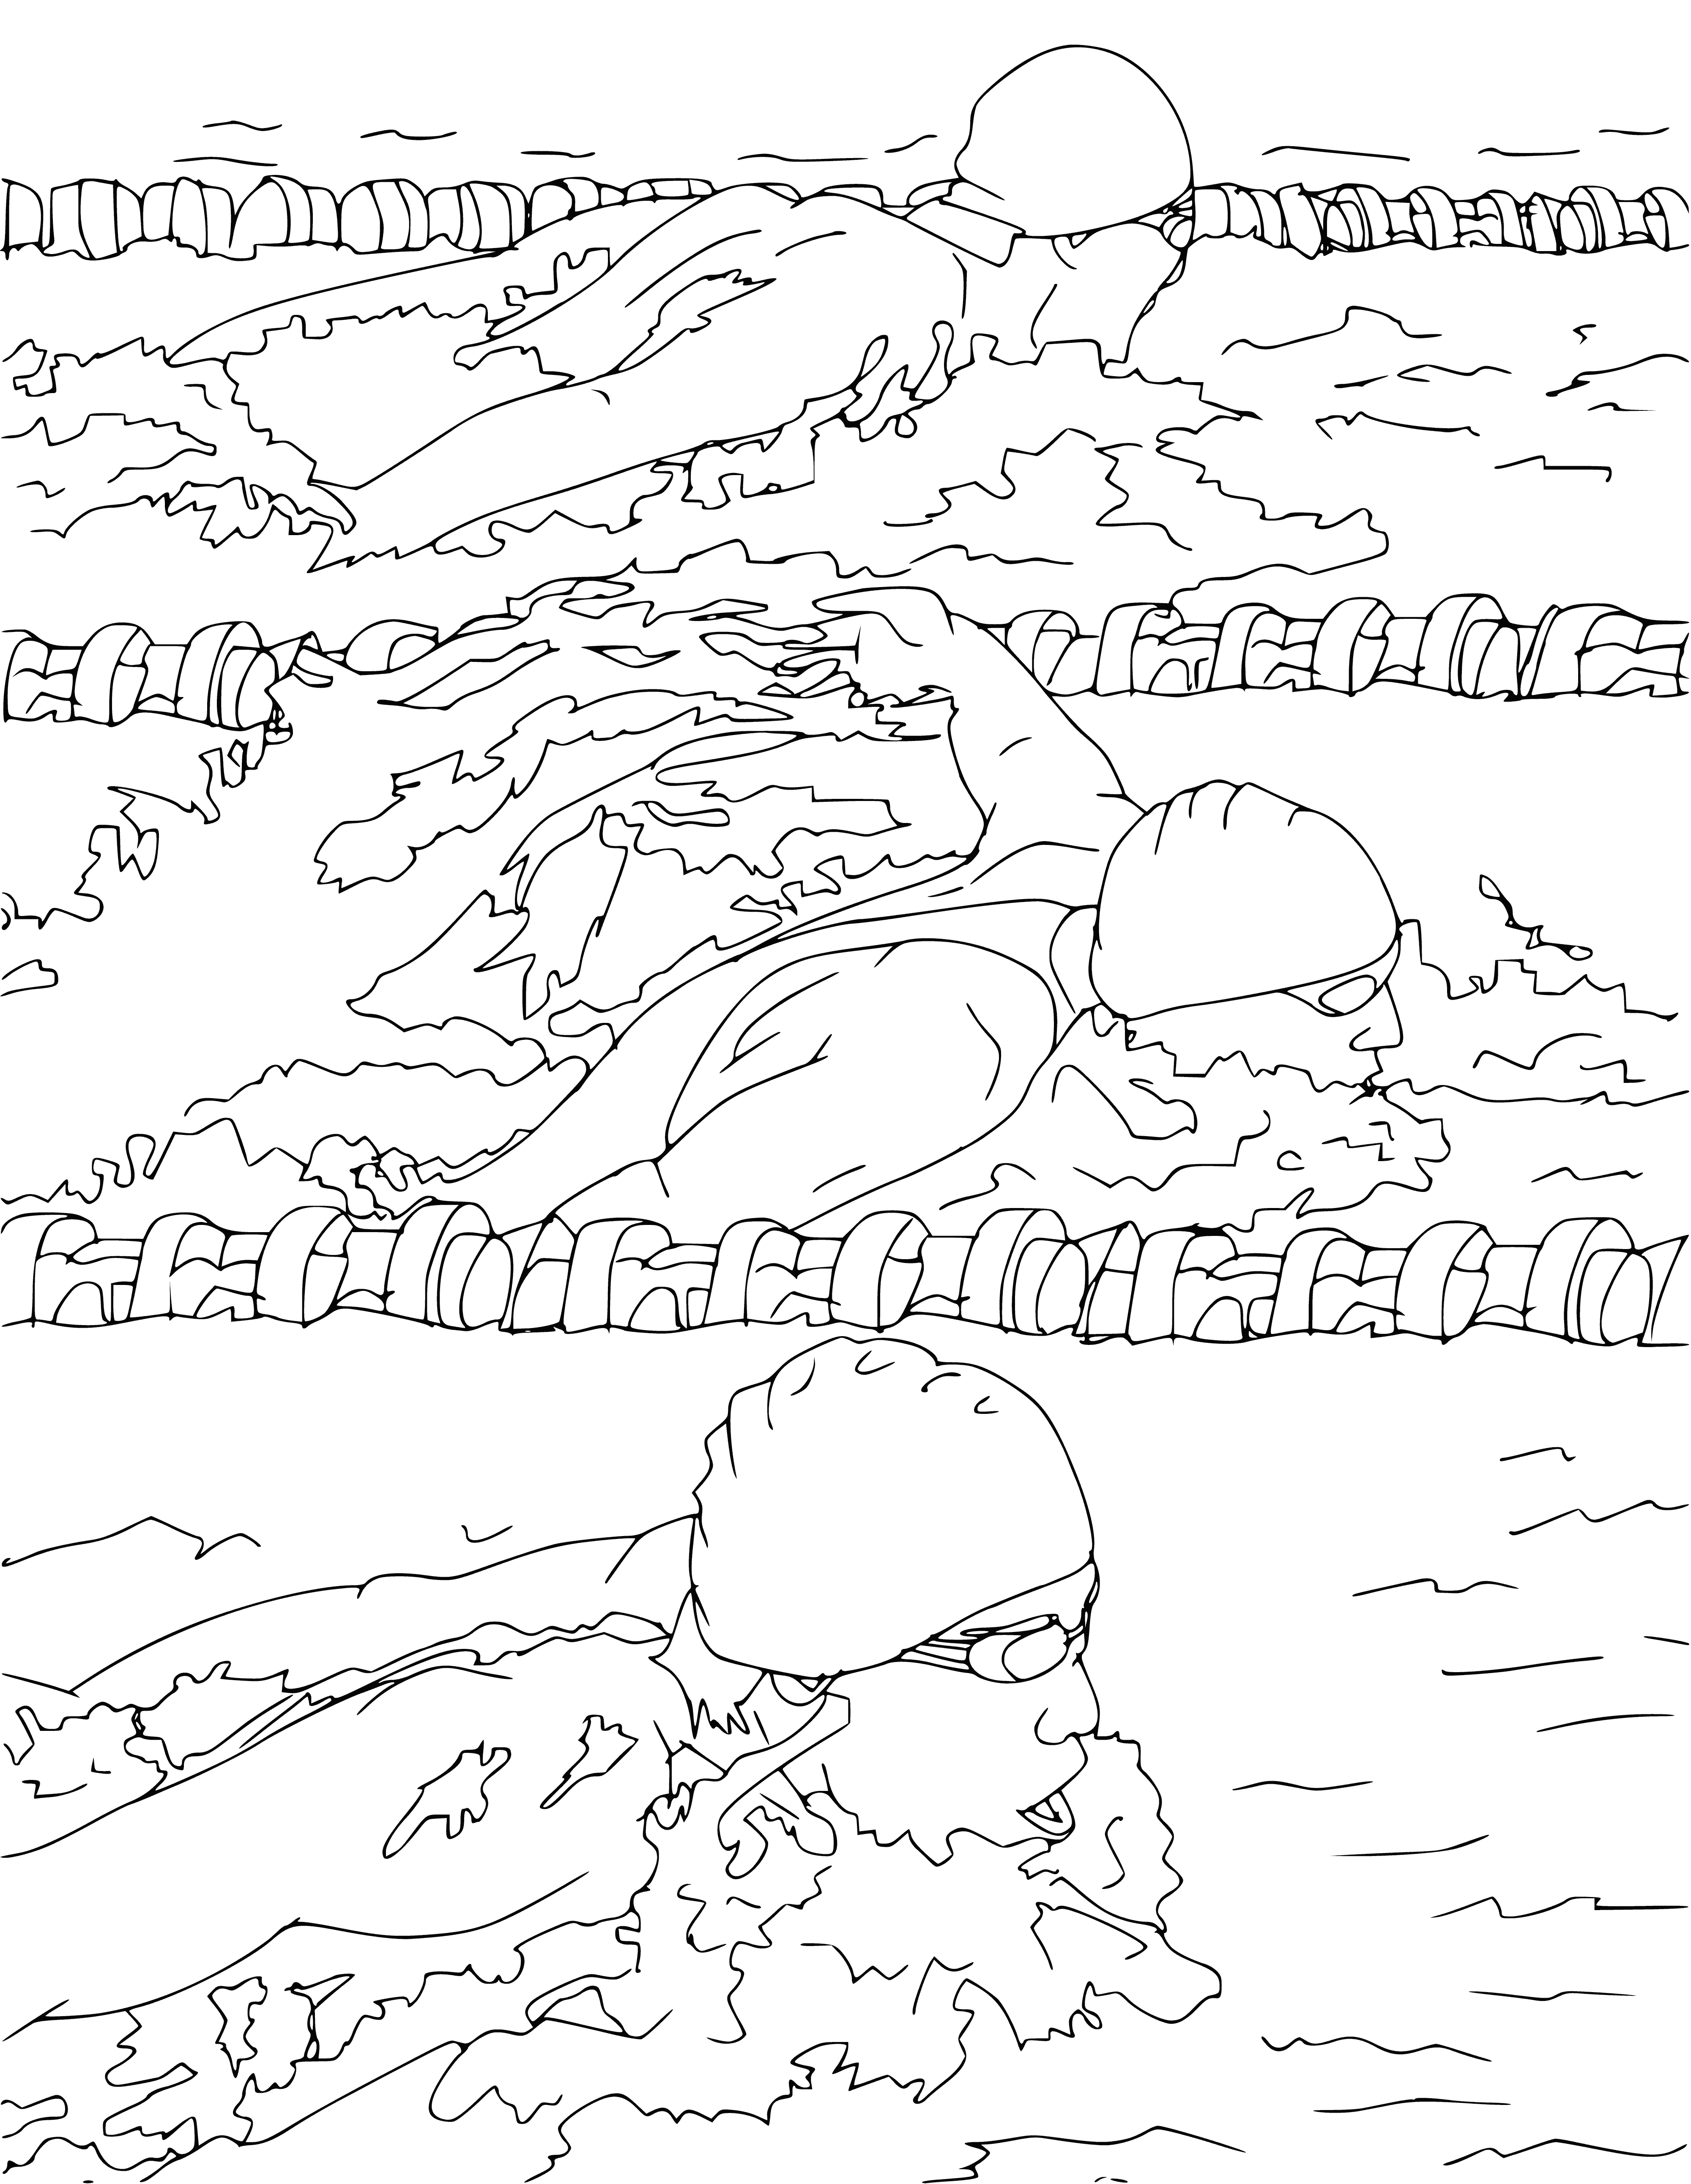 coloring page: Swimmers of all colors race in the Olympic-style pool, with deep blue water and white lane lines. Two swimmers in action, the rest starting or at the wall. Tiled deck, green trees add to the peaceful scene.